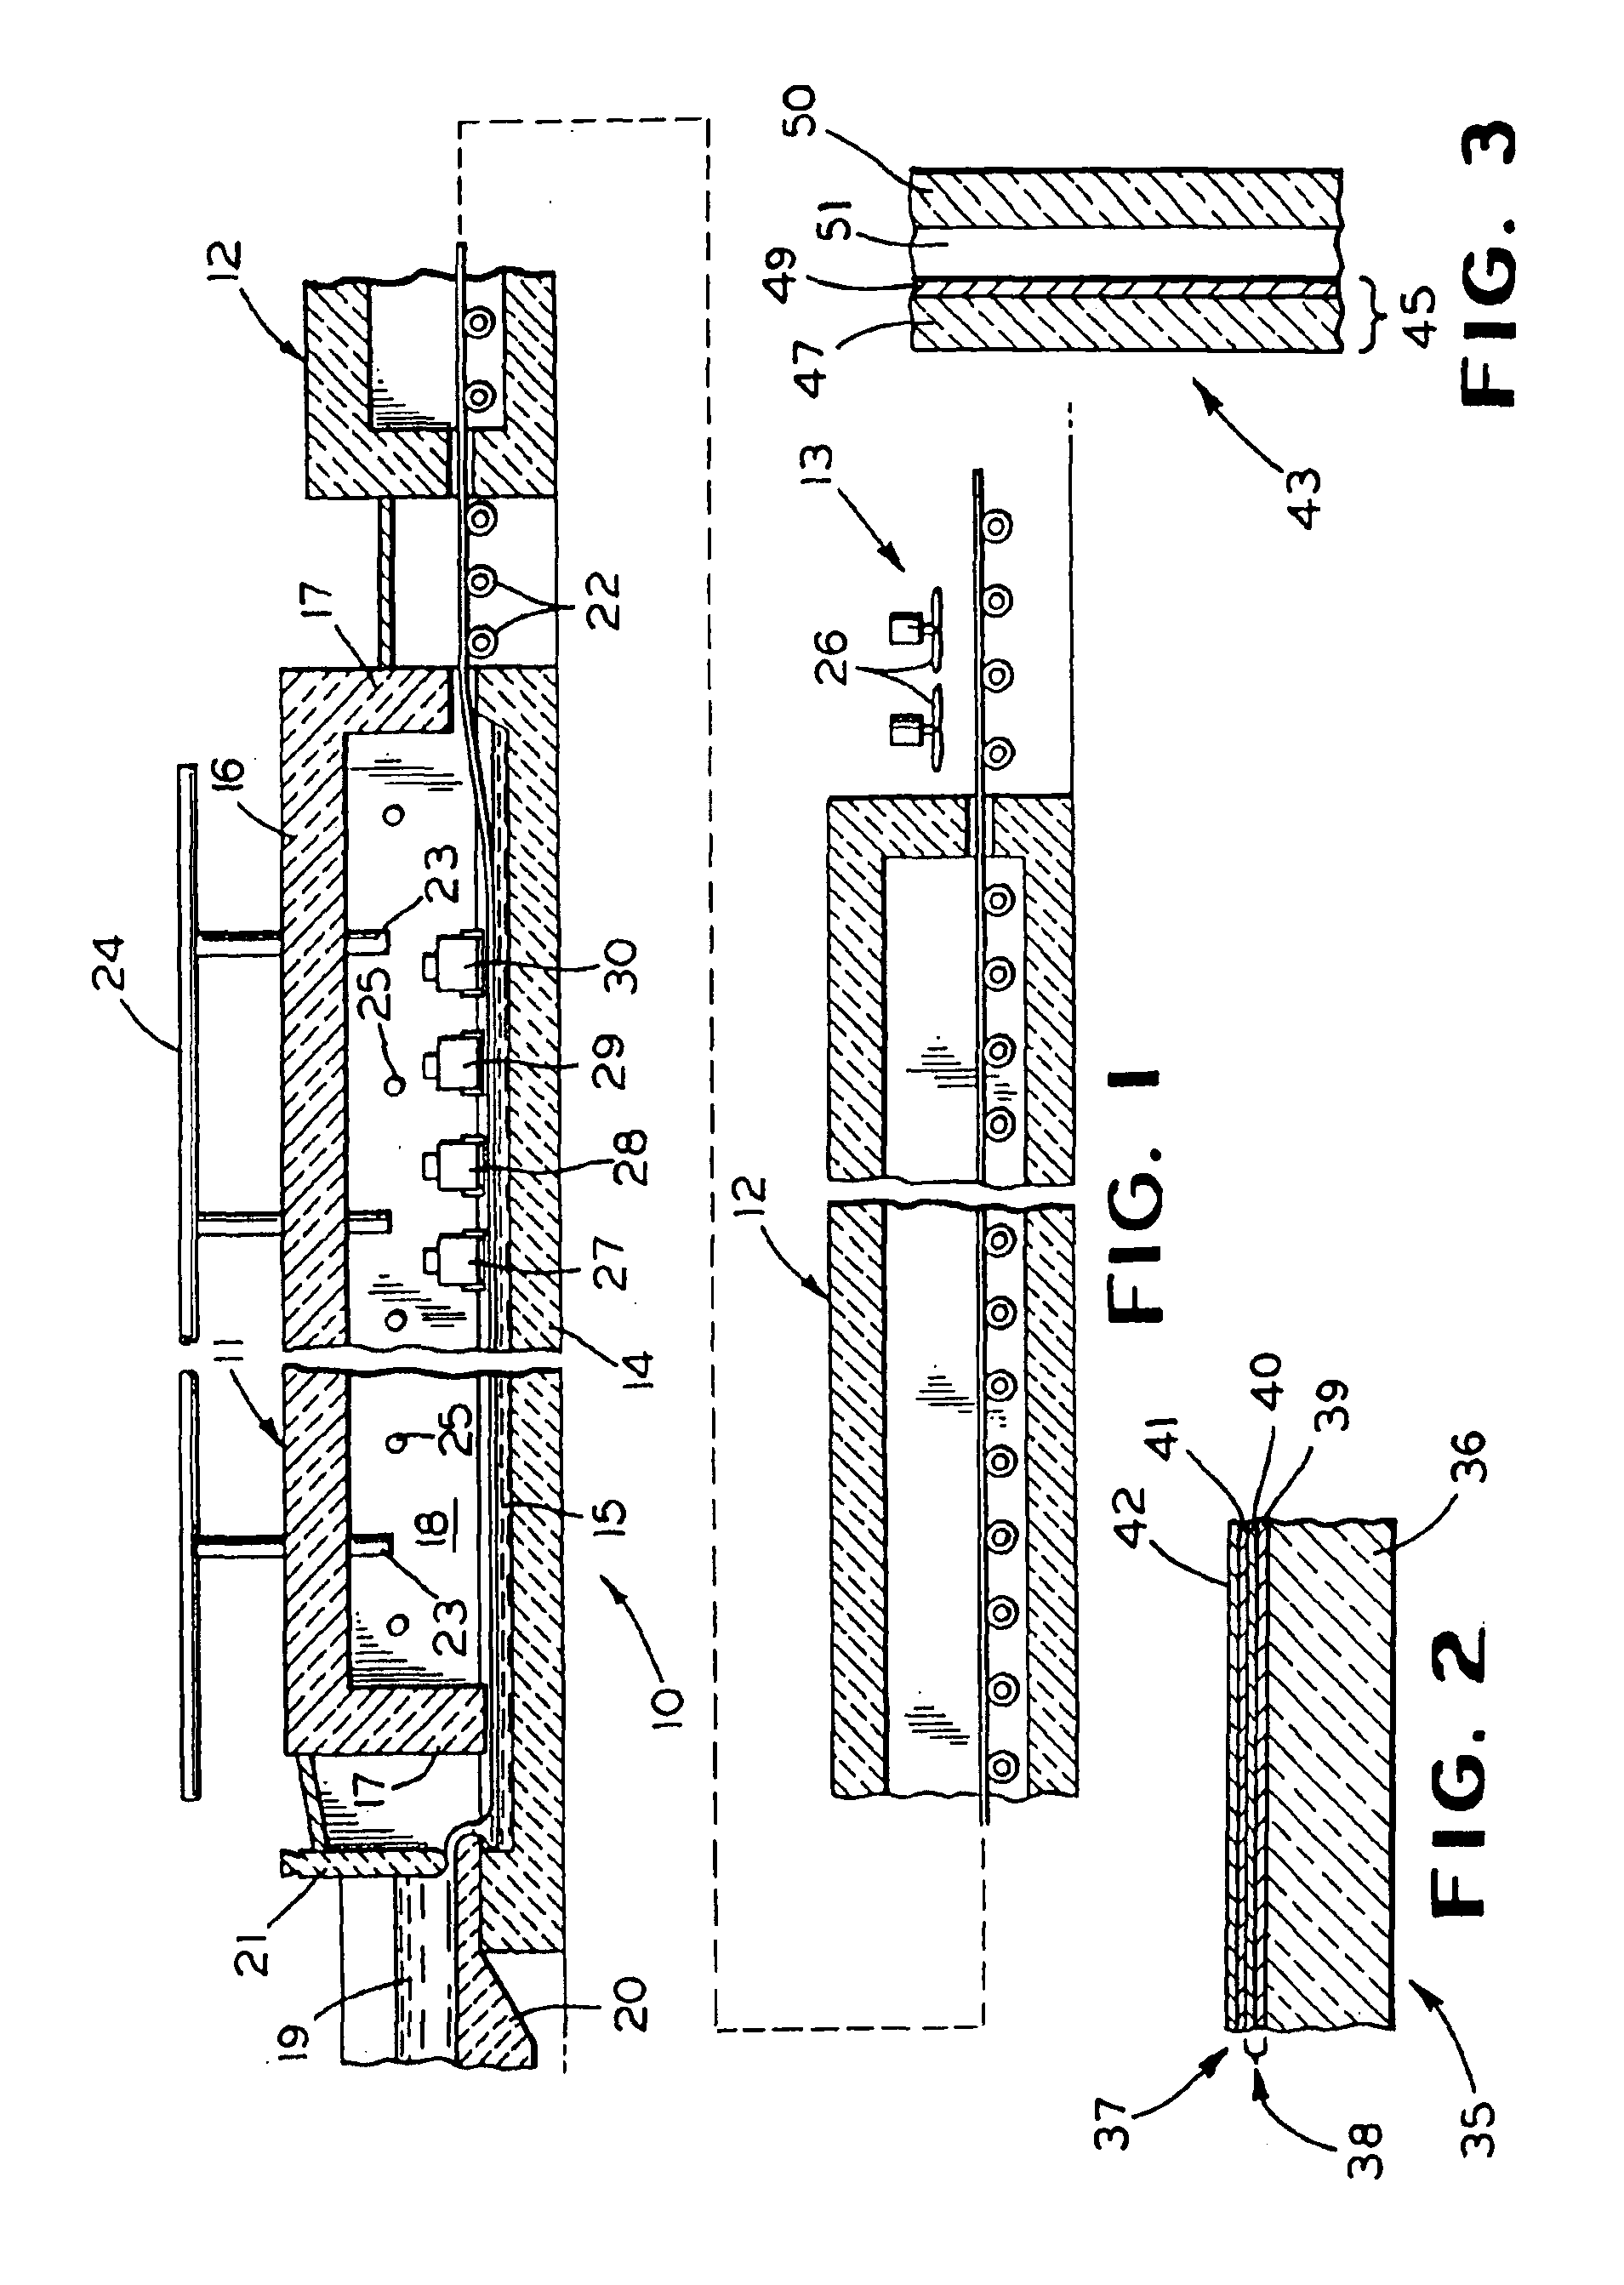 Glass article having a solar control coating